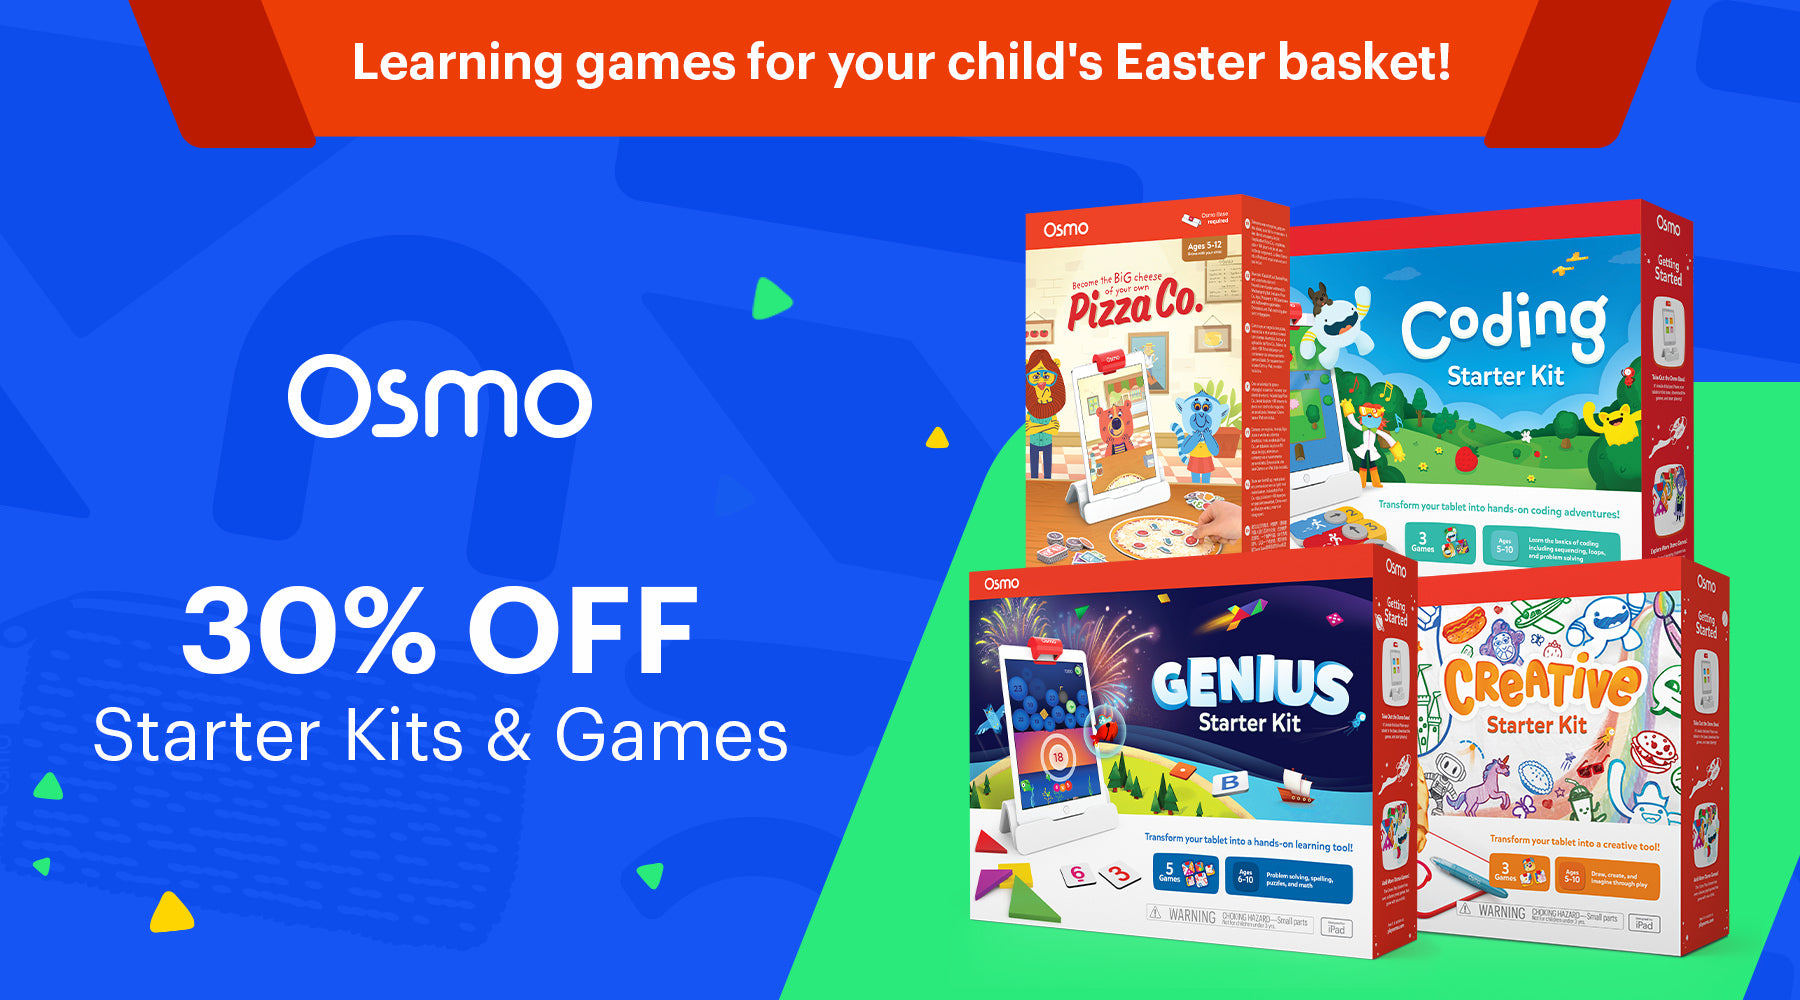 Osmo 30% OFF Sale!